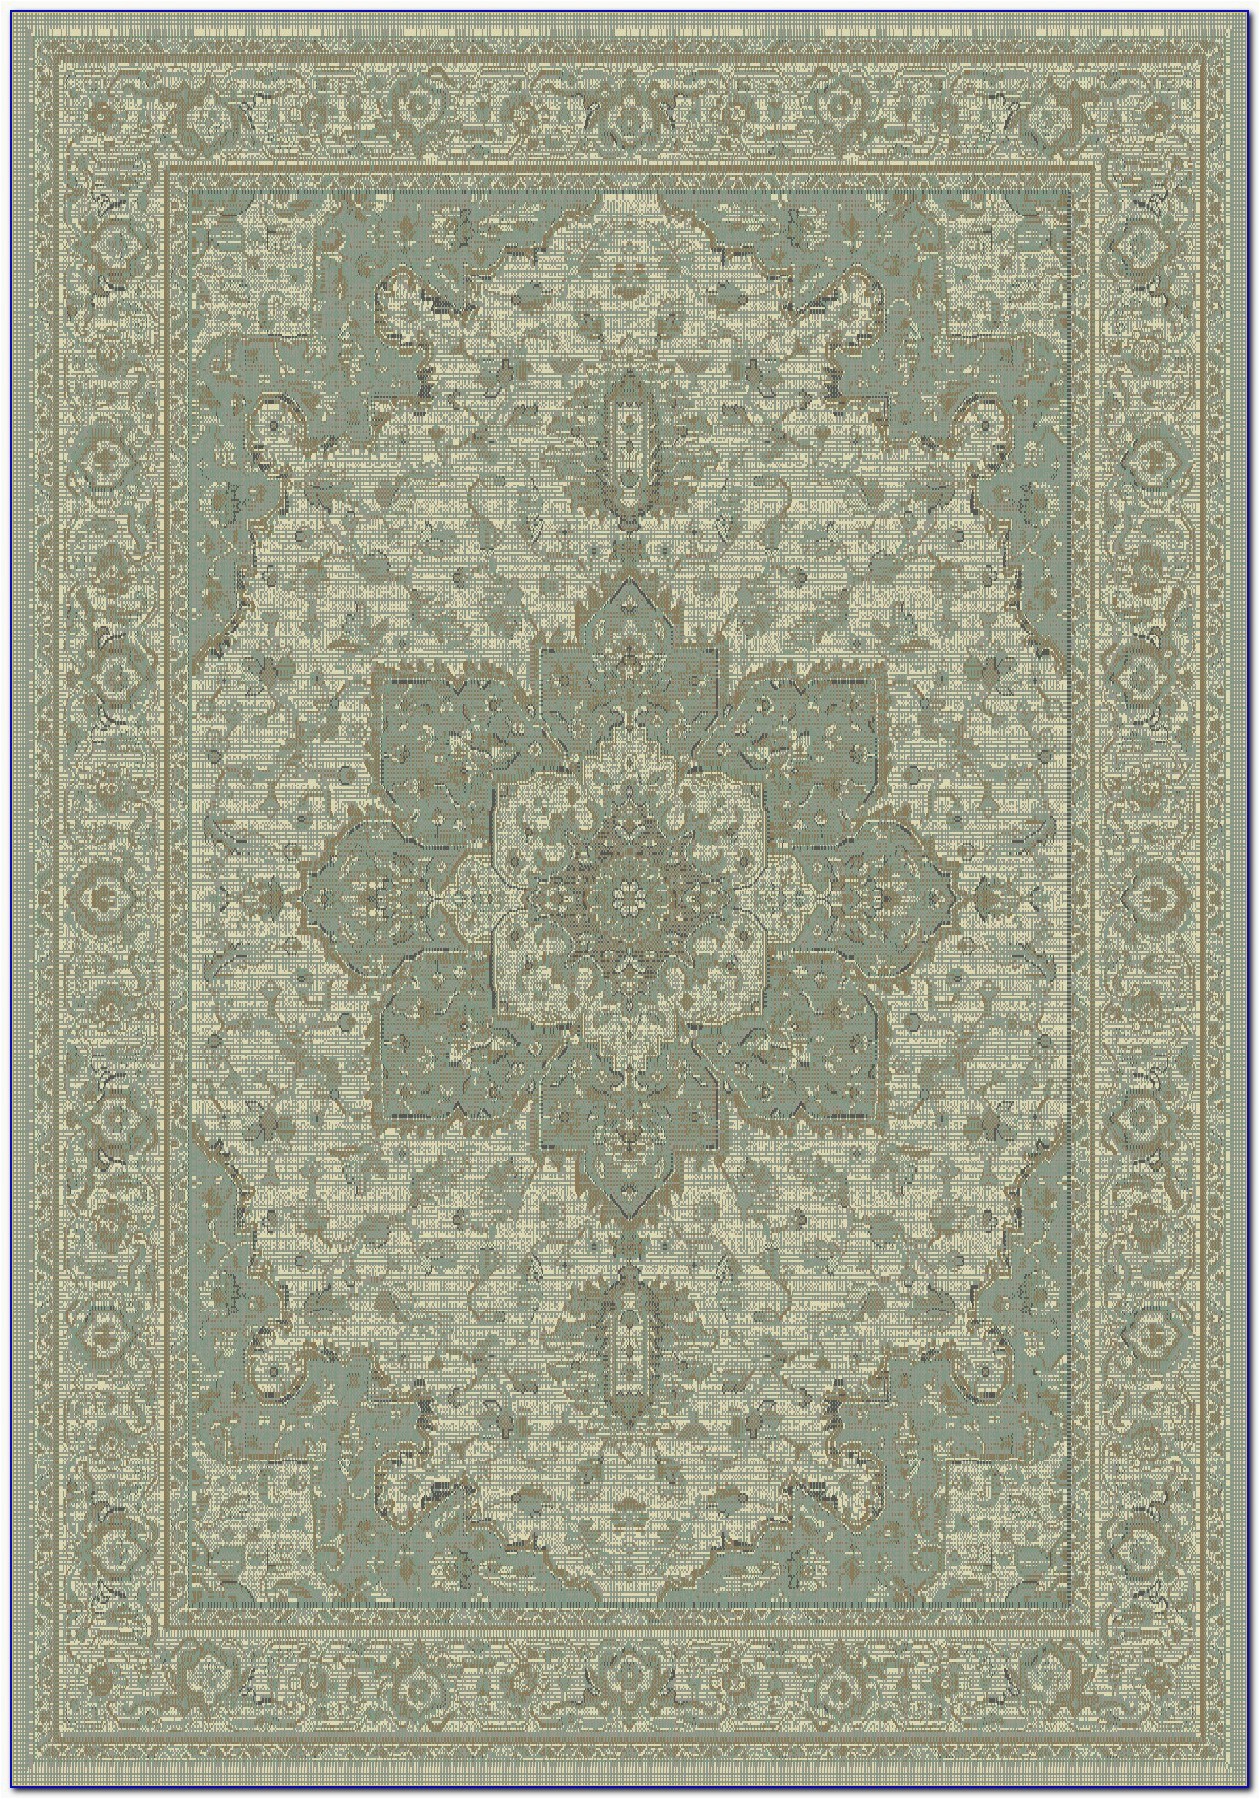 Sage Green area Rugs Target Sage Green and Brown area Rug Rugs Home Design Ideas